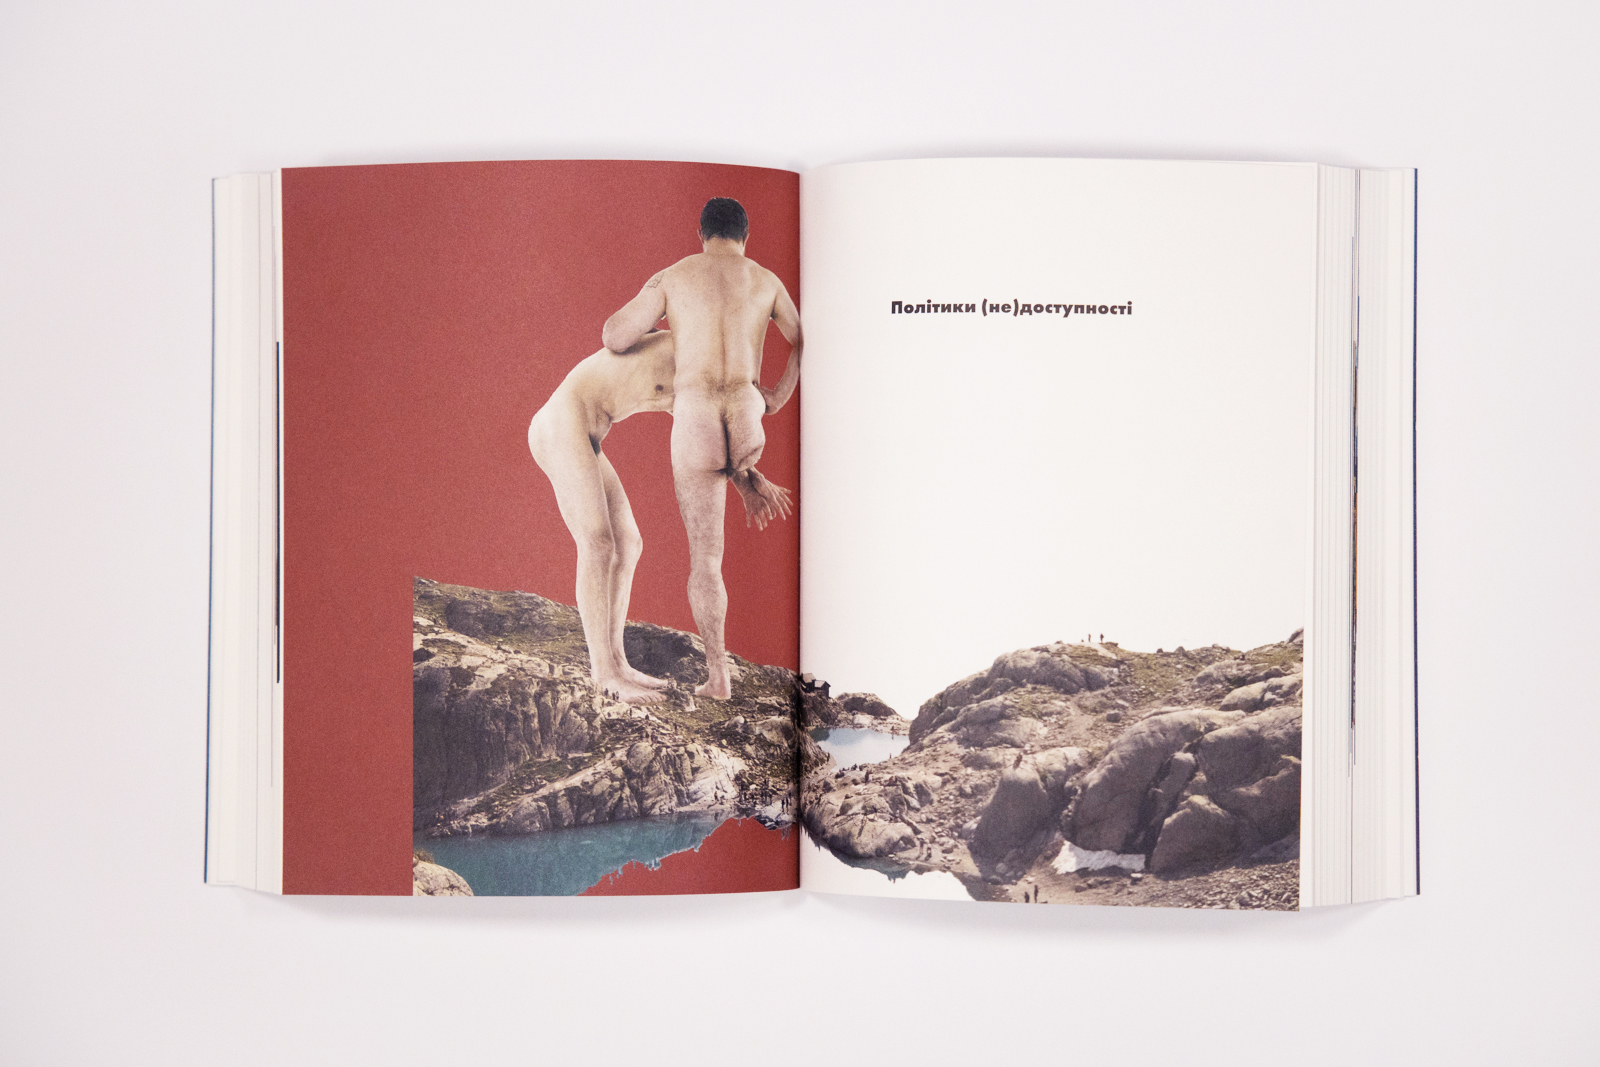 The book is opened to a page showing an artwork of two naked men. One has his right leg amputated, the other shows his hands under the amputated area. The figures are depicted against a red background.